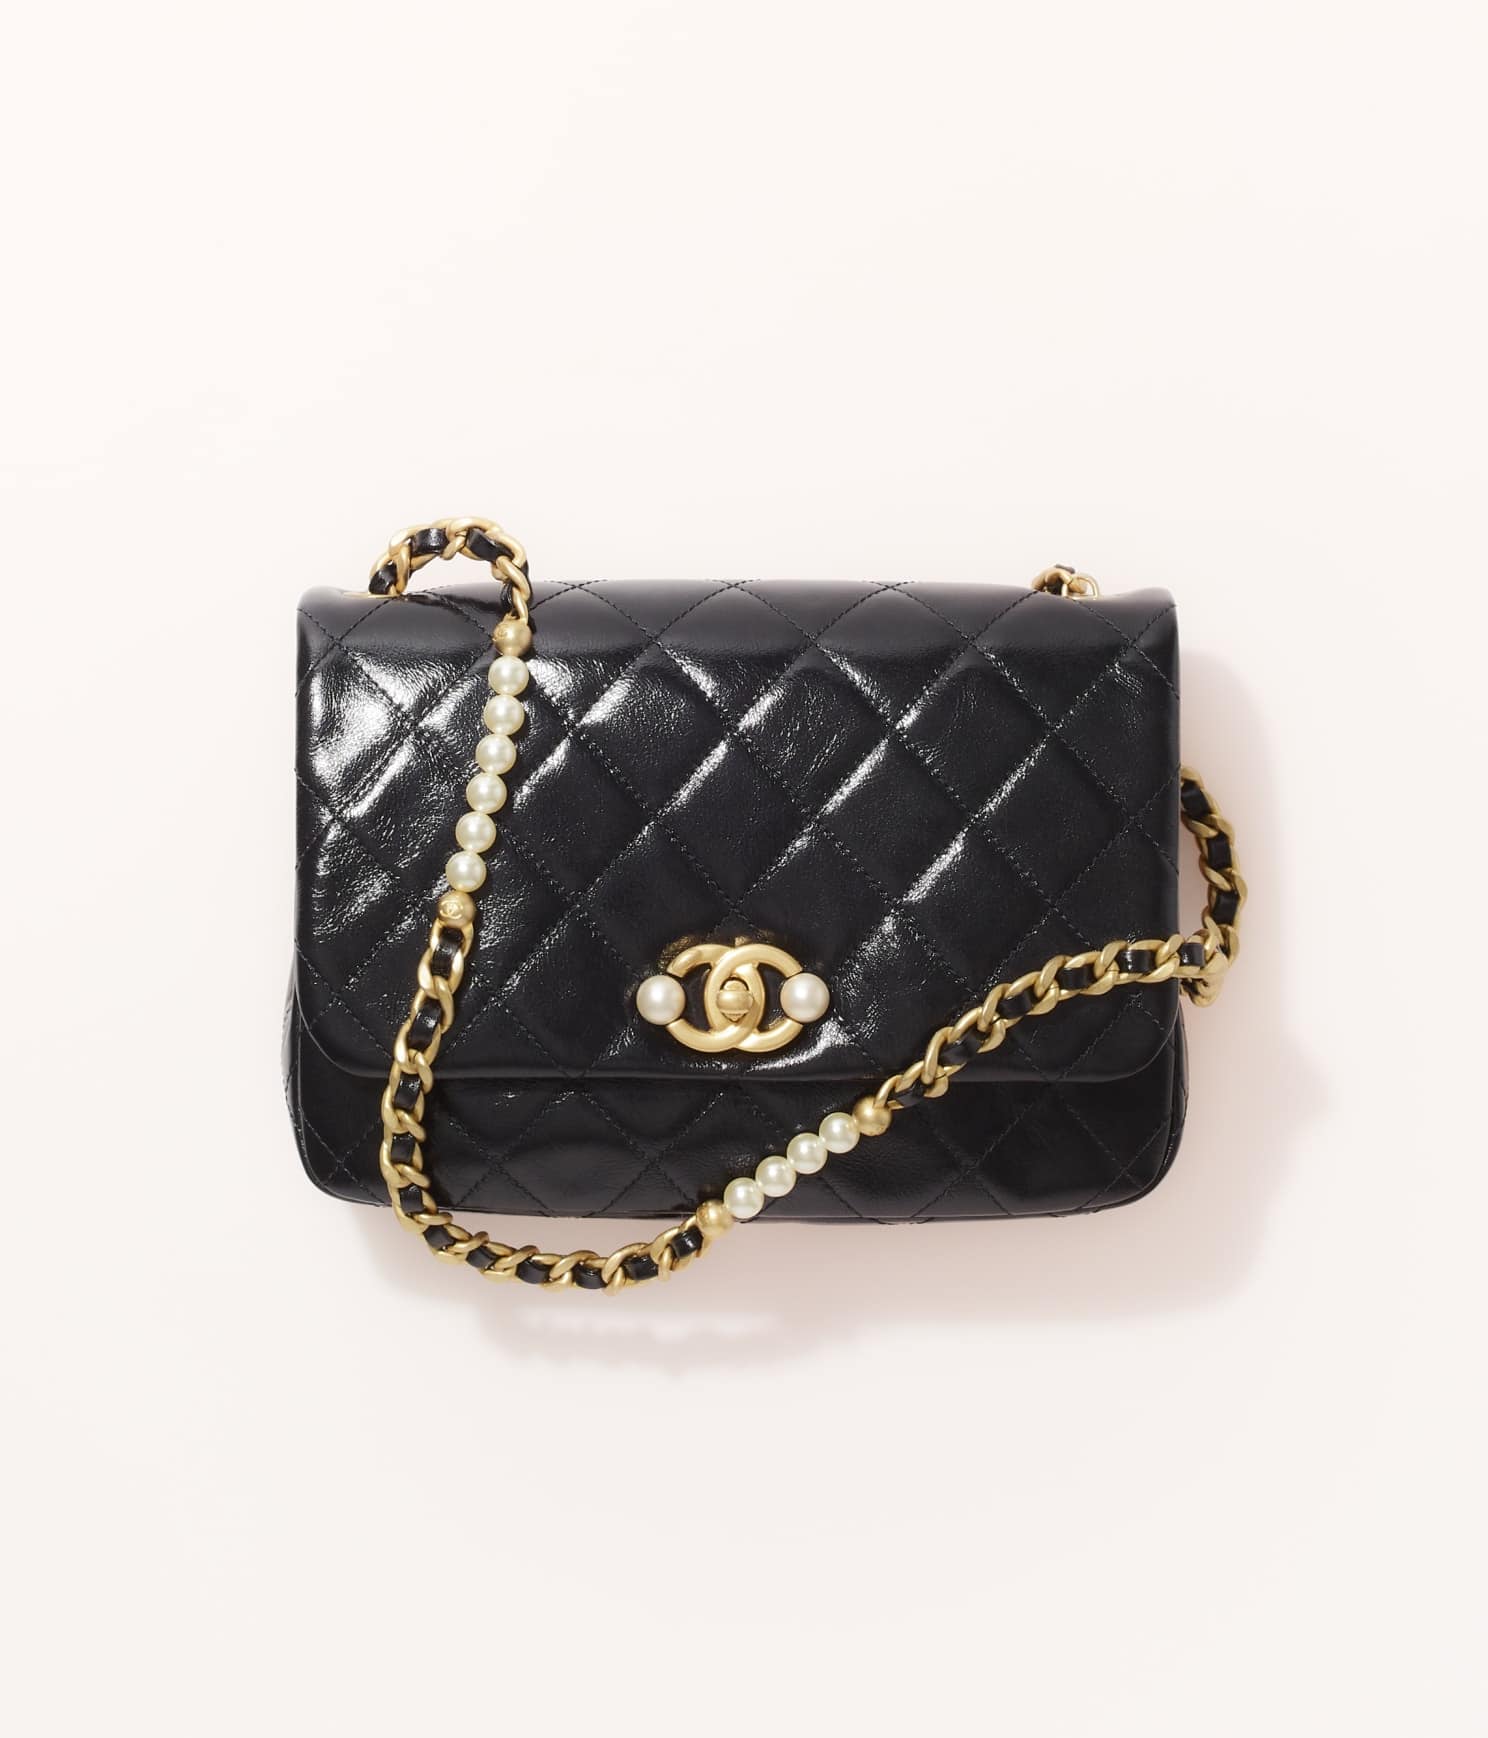 Chanel Handbags Price In India Greece SAVE 59  silvavaldeses